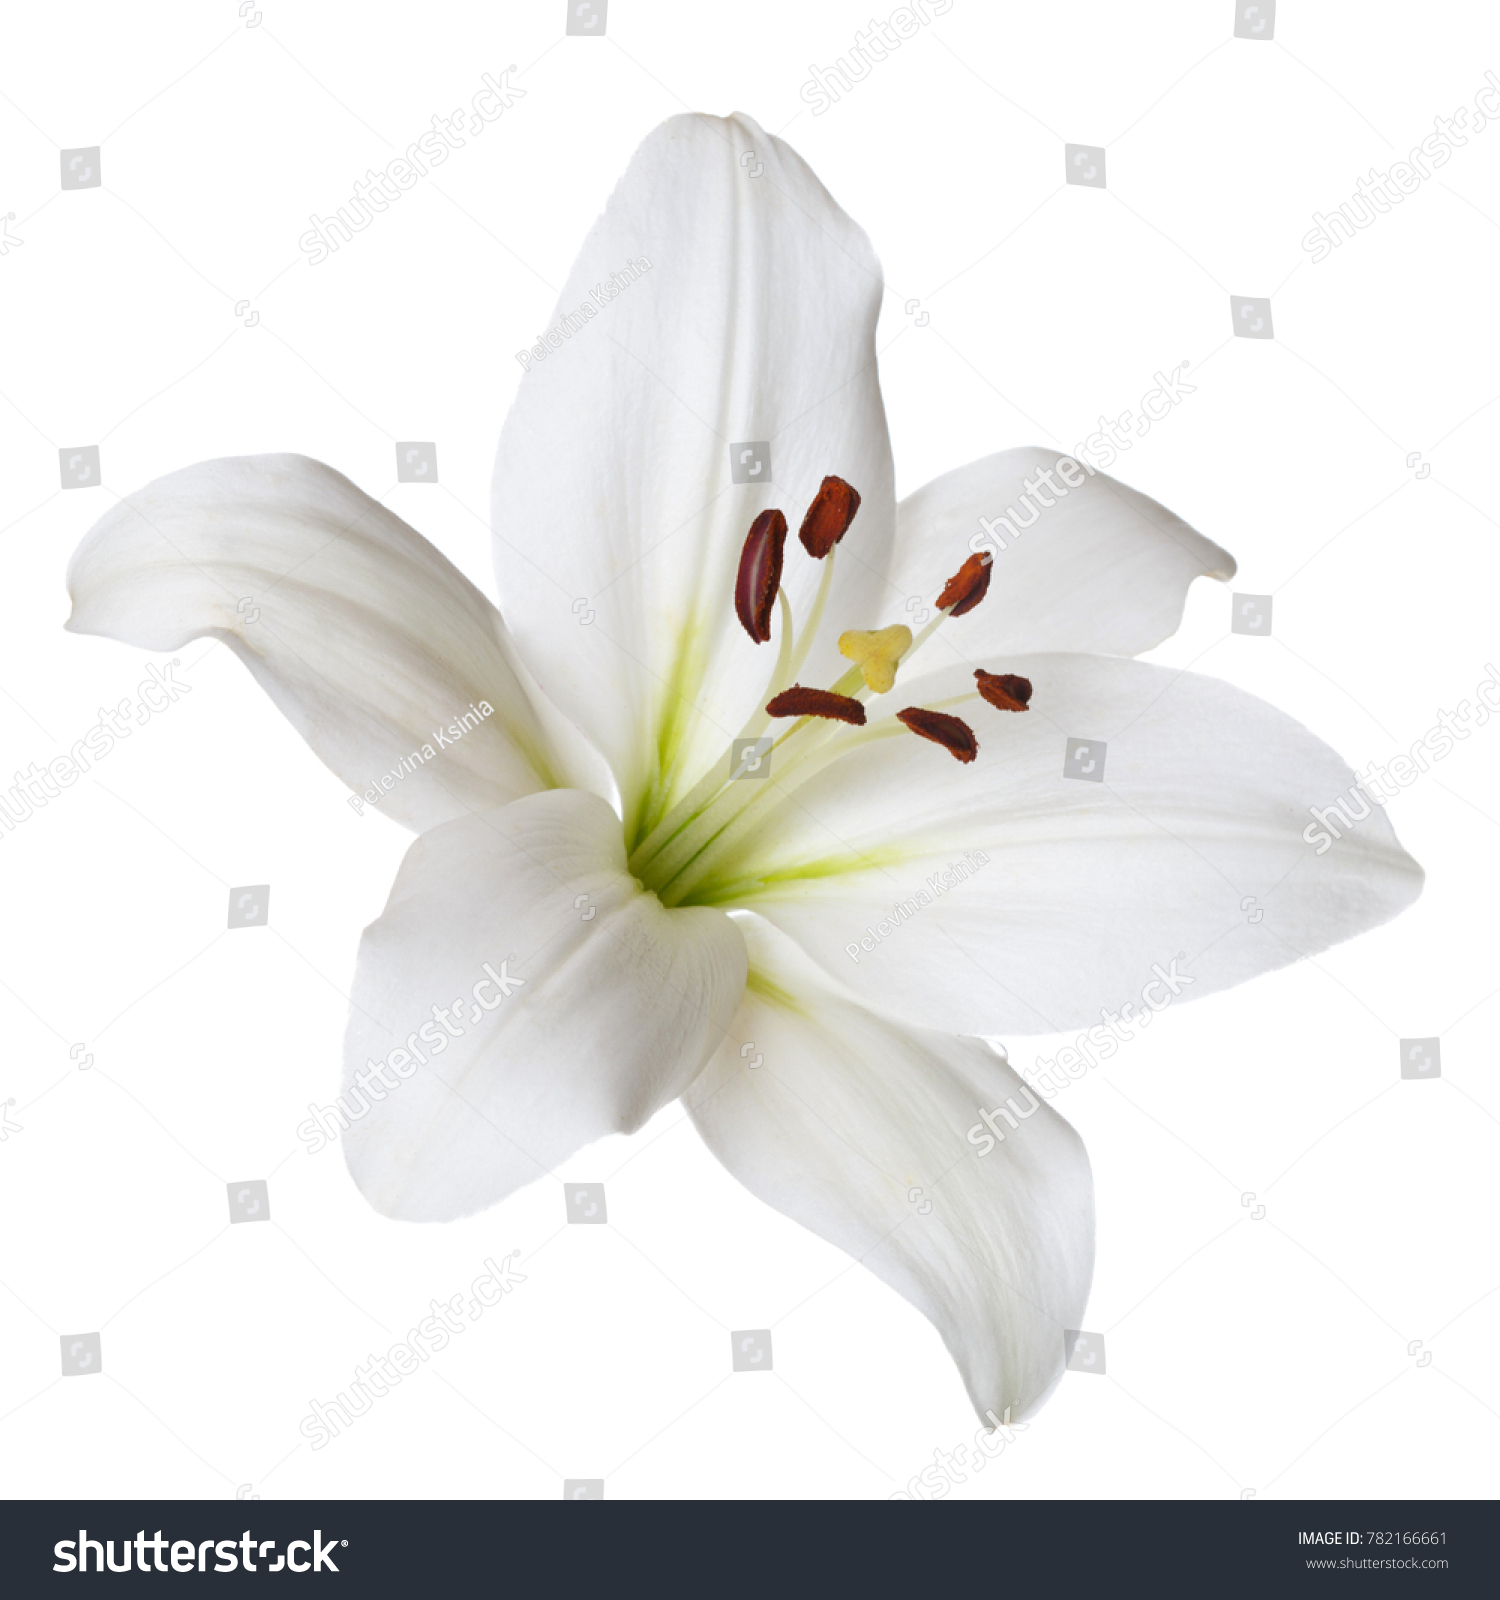 Flower light lily isolated on white background. #782166661